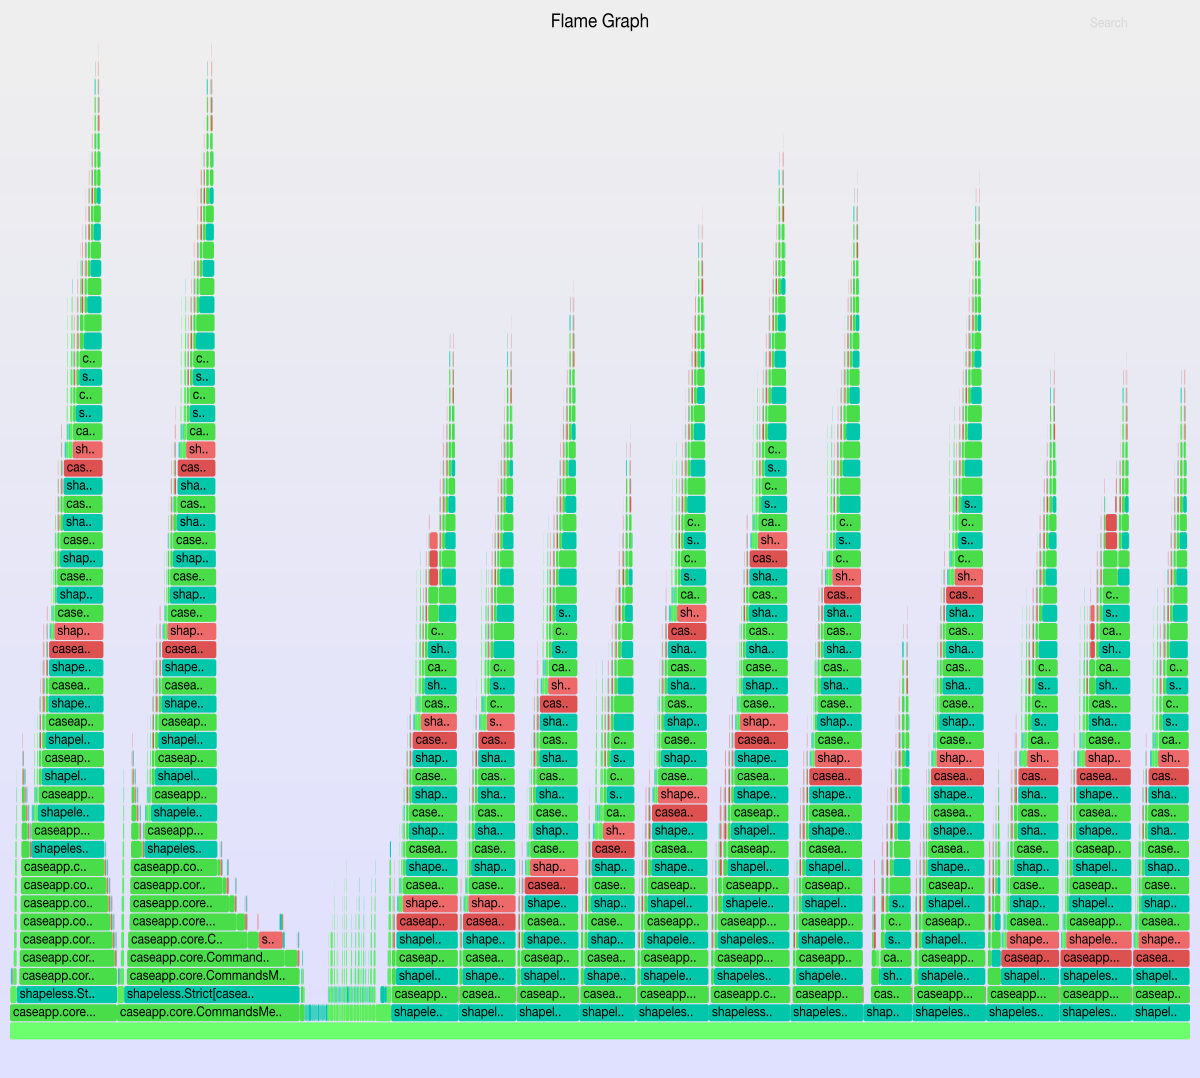 Flamegraph after more cached parsers